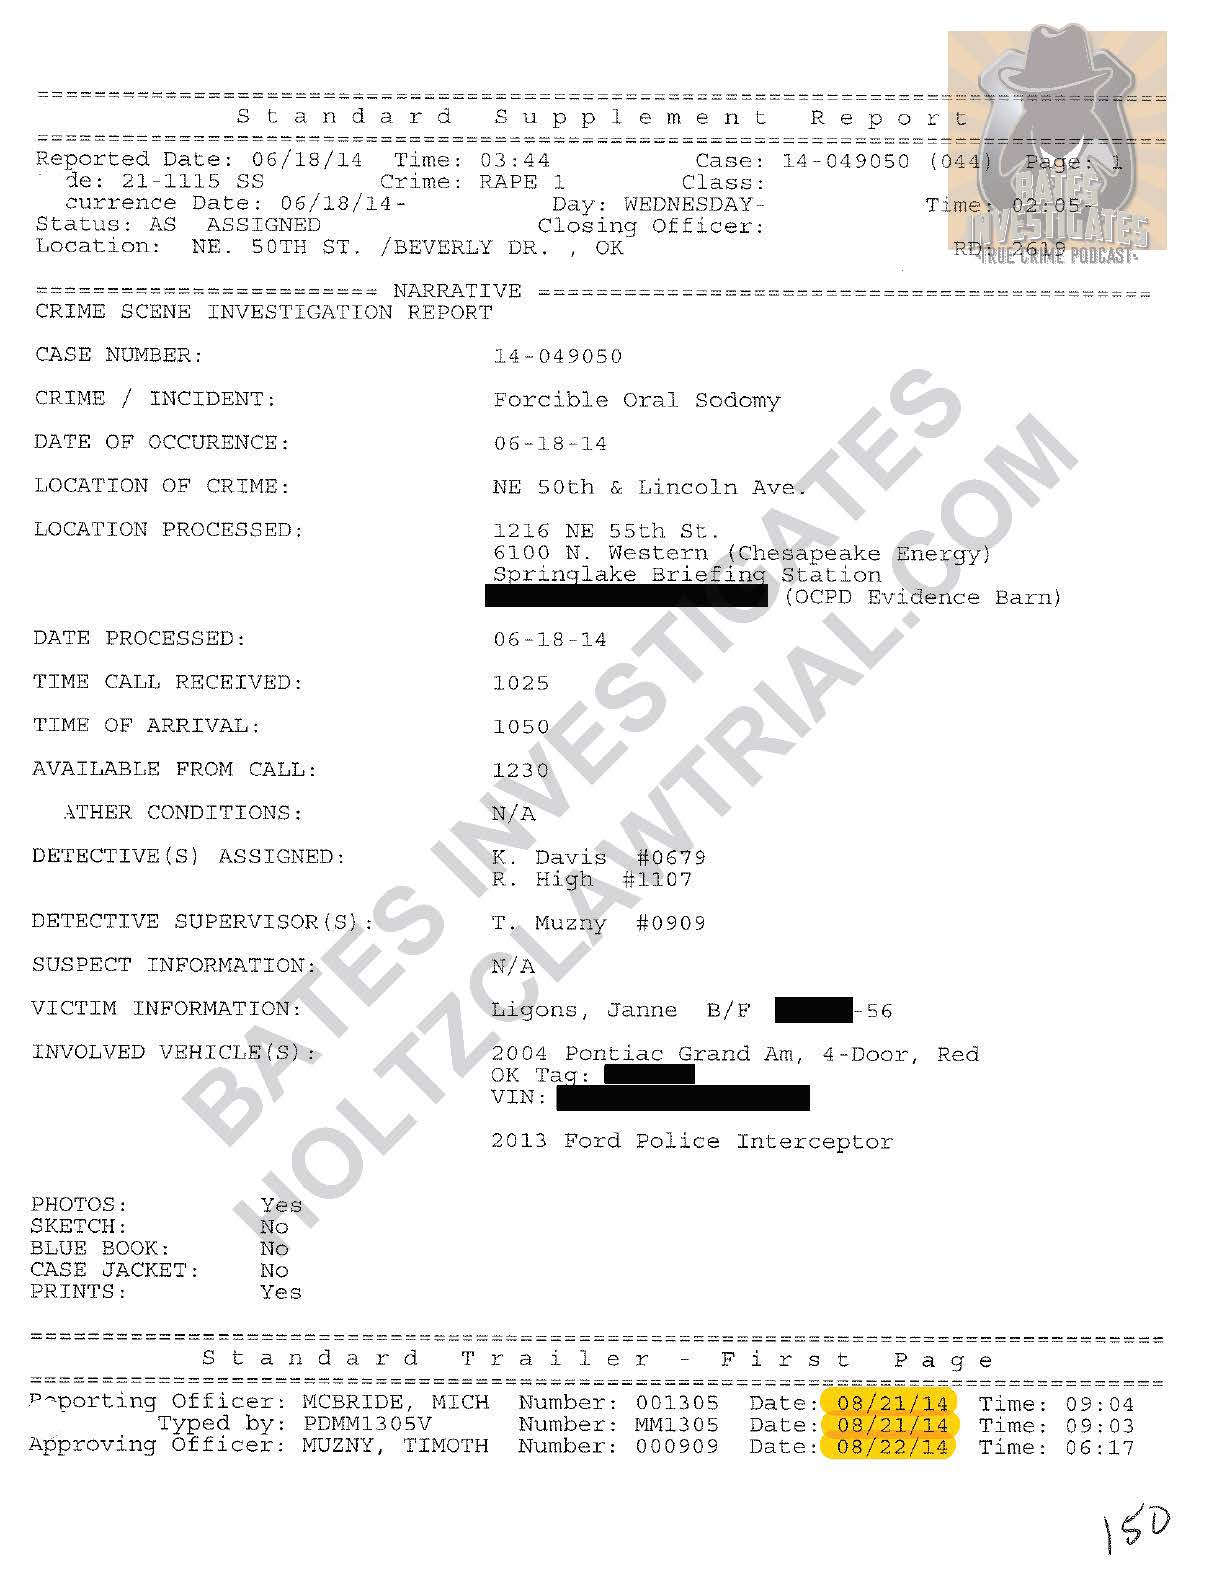 Holtzclaw - Ep02 - Police Reports Watermarked_Page_43.jpg